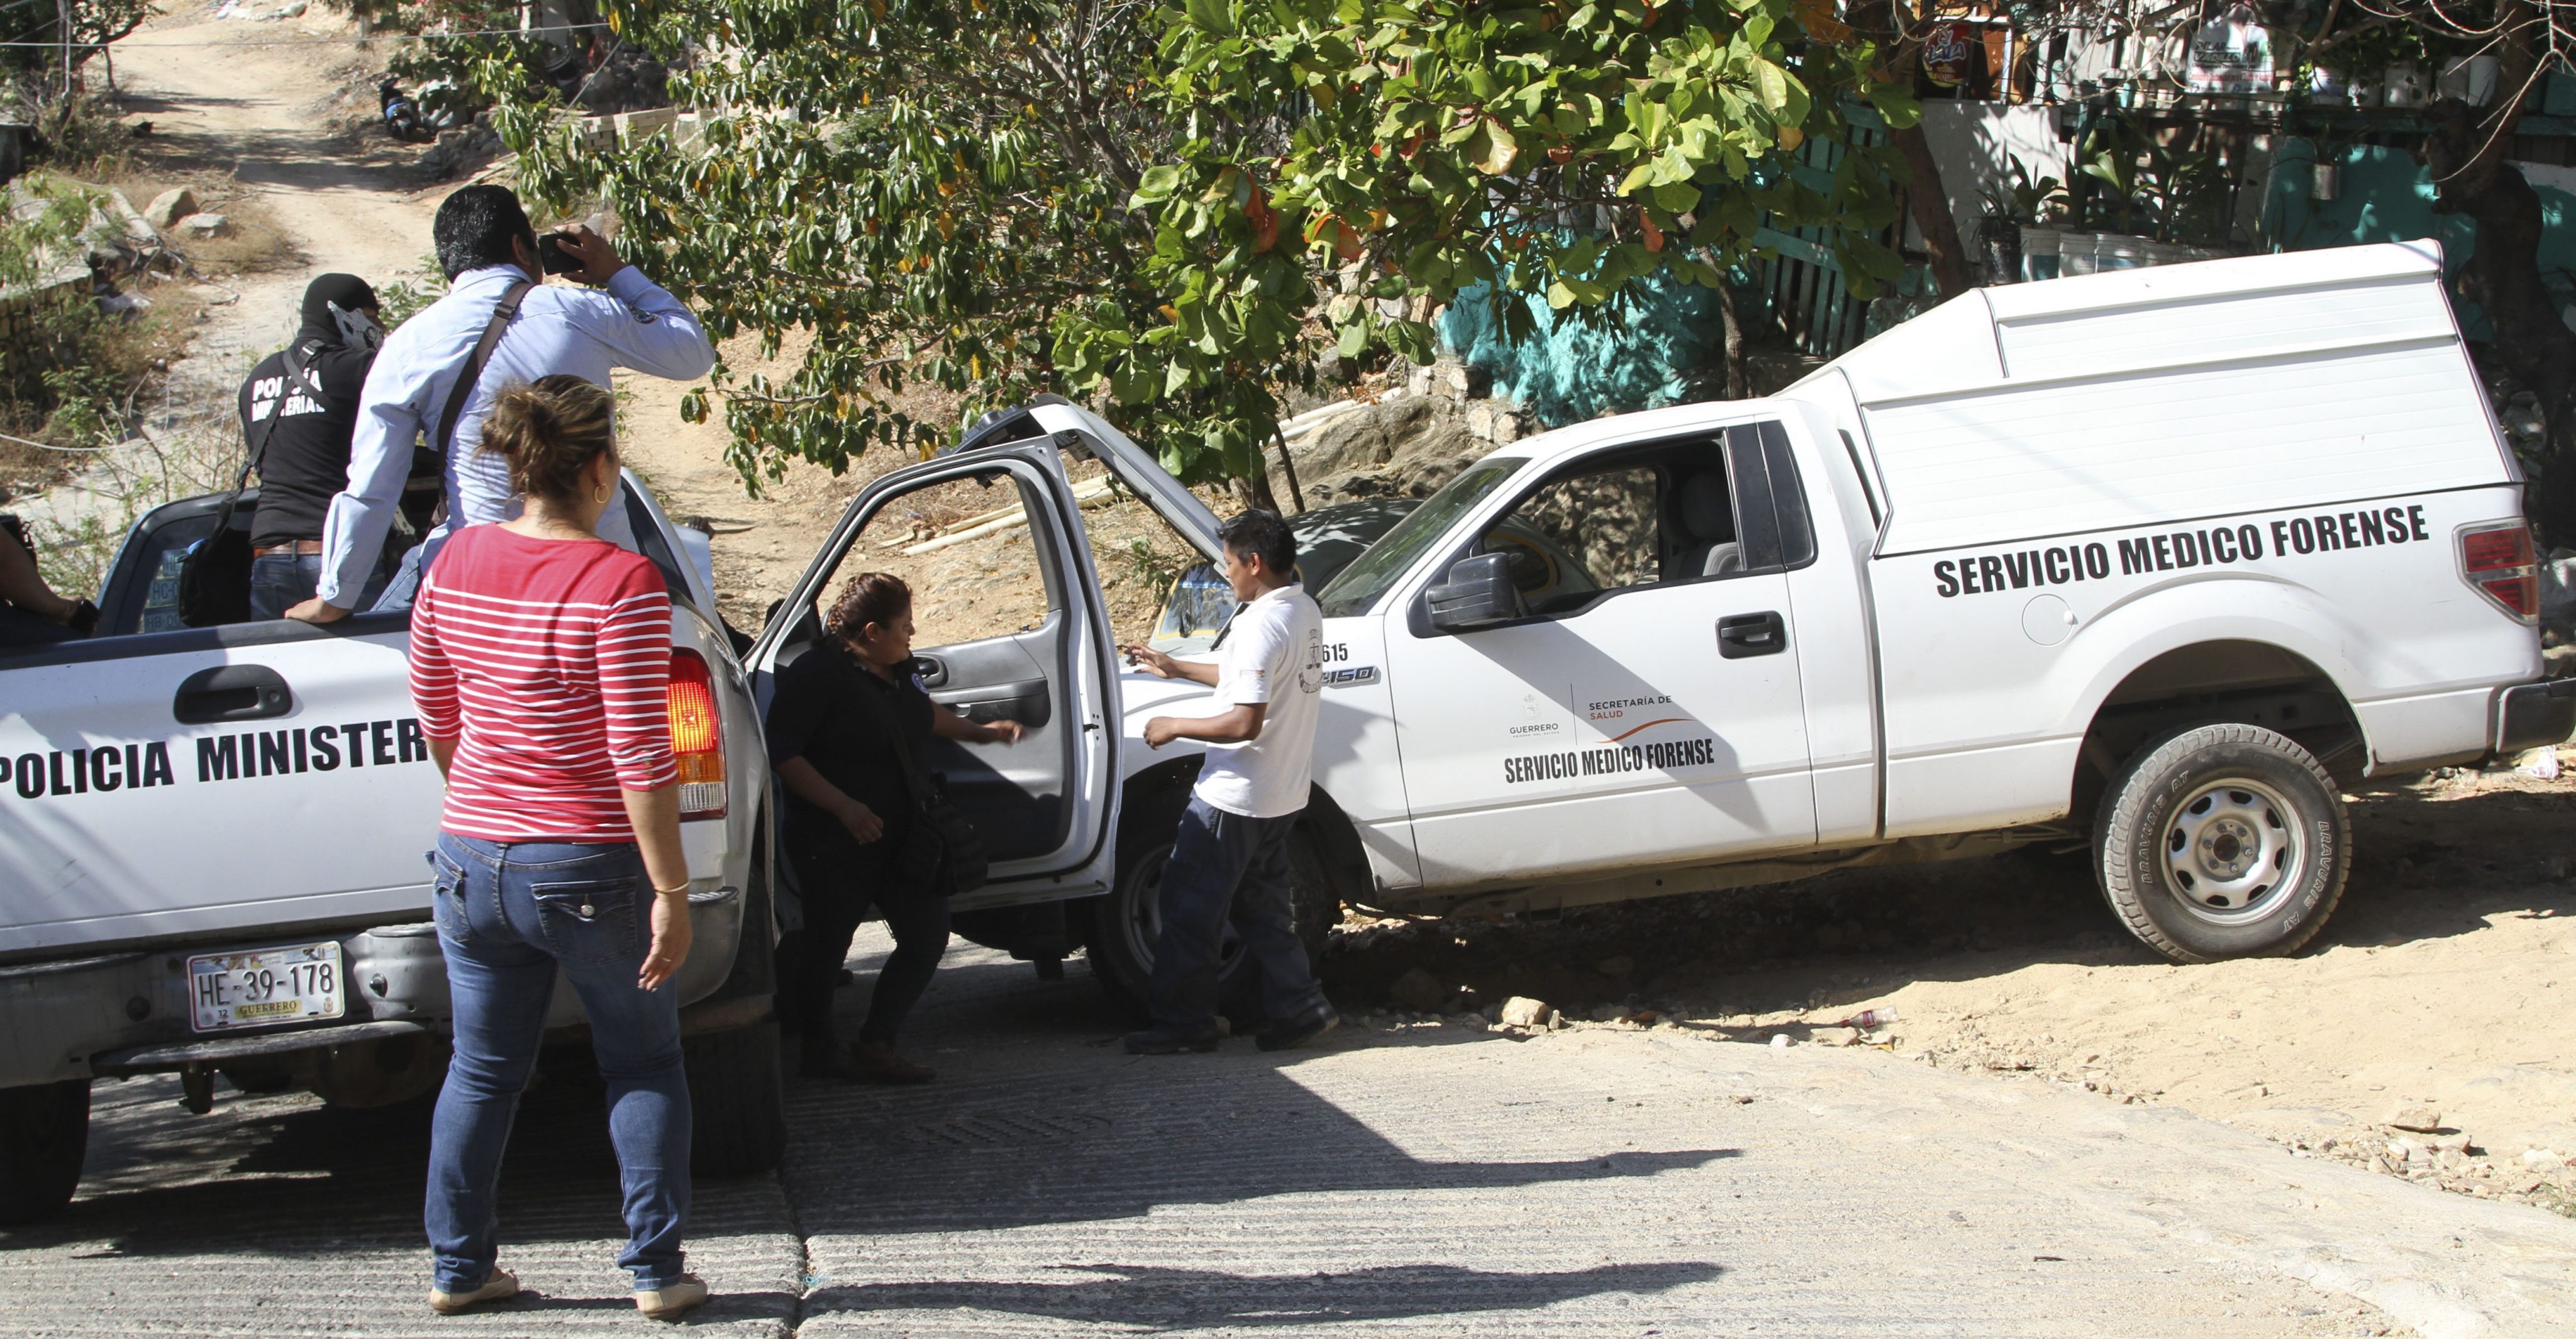 Murdered eight indigenous and injure two in Guerrero